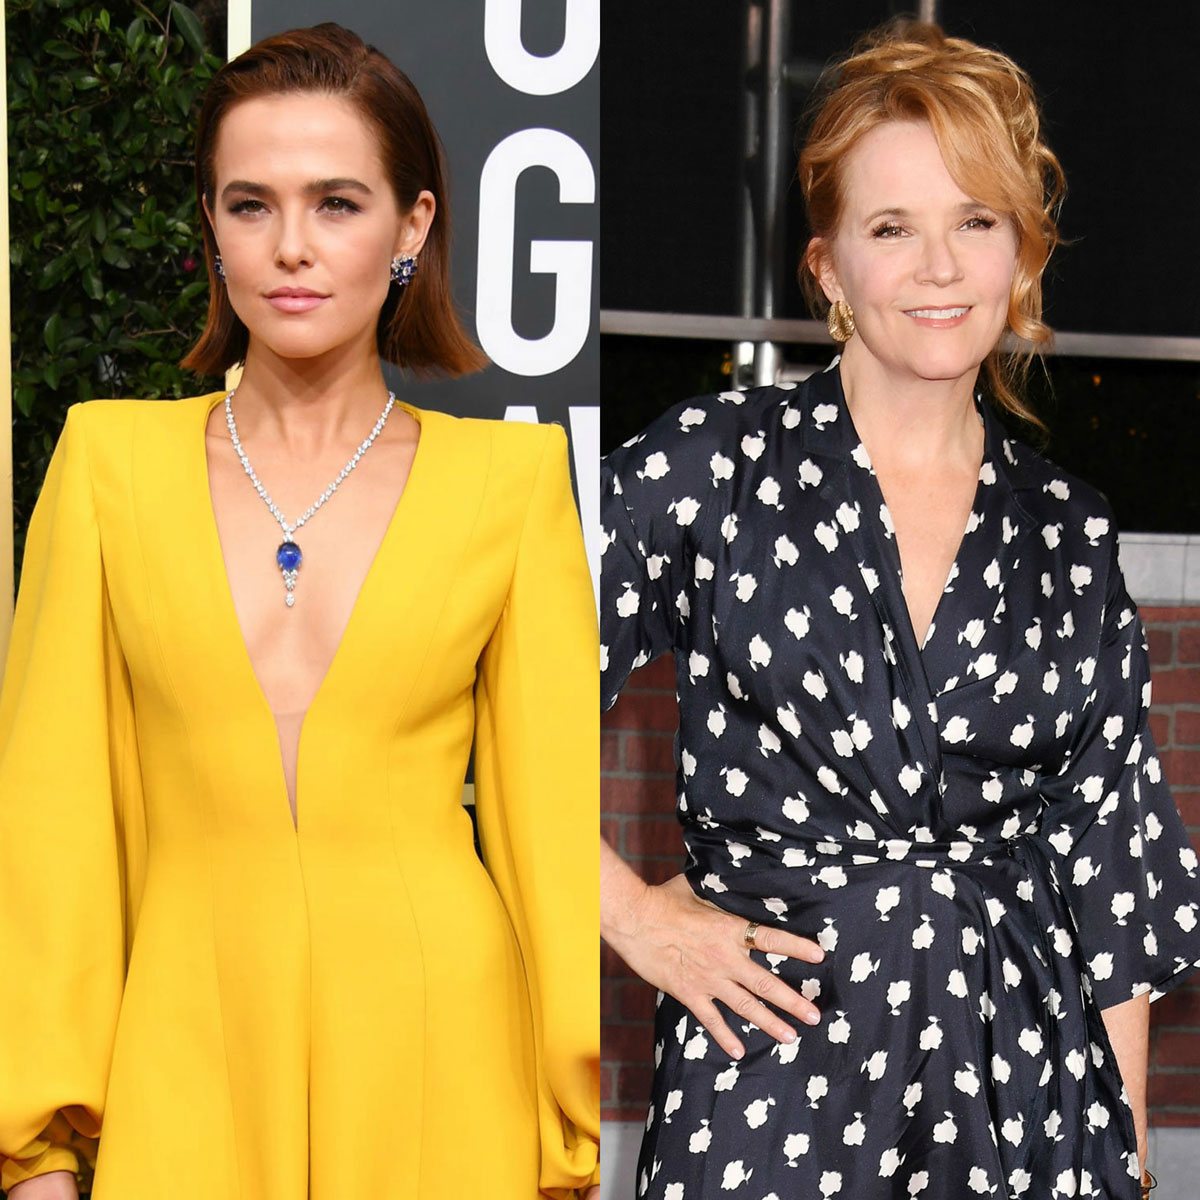 Zoey Deutch and Lea Thompson are related